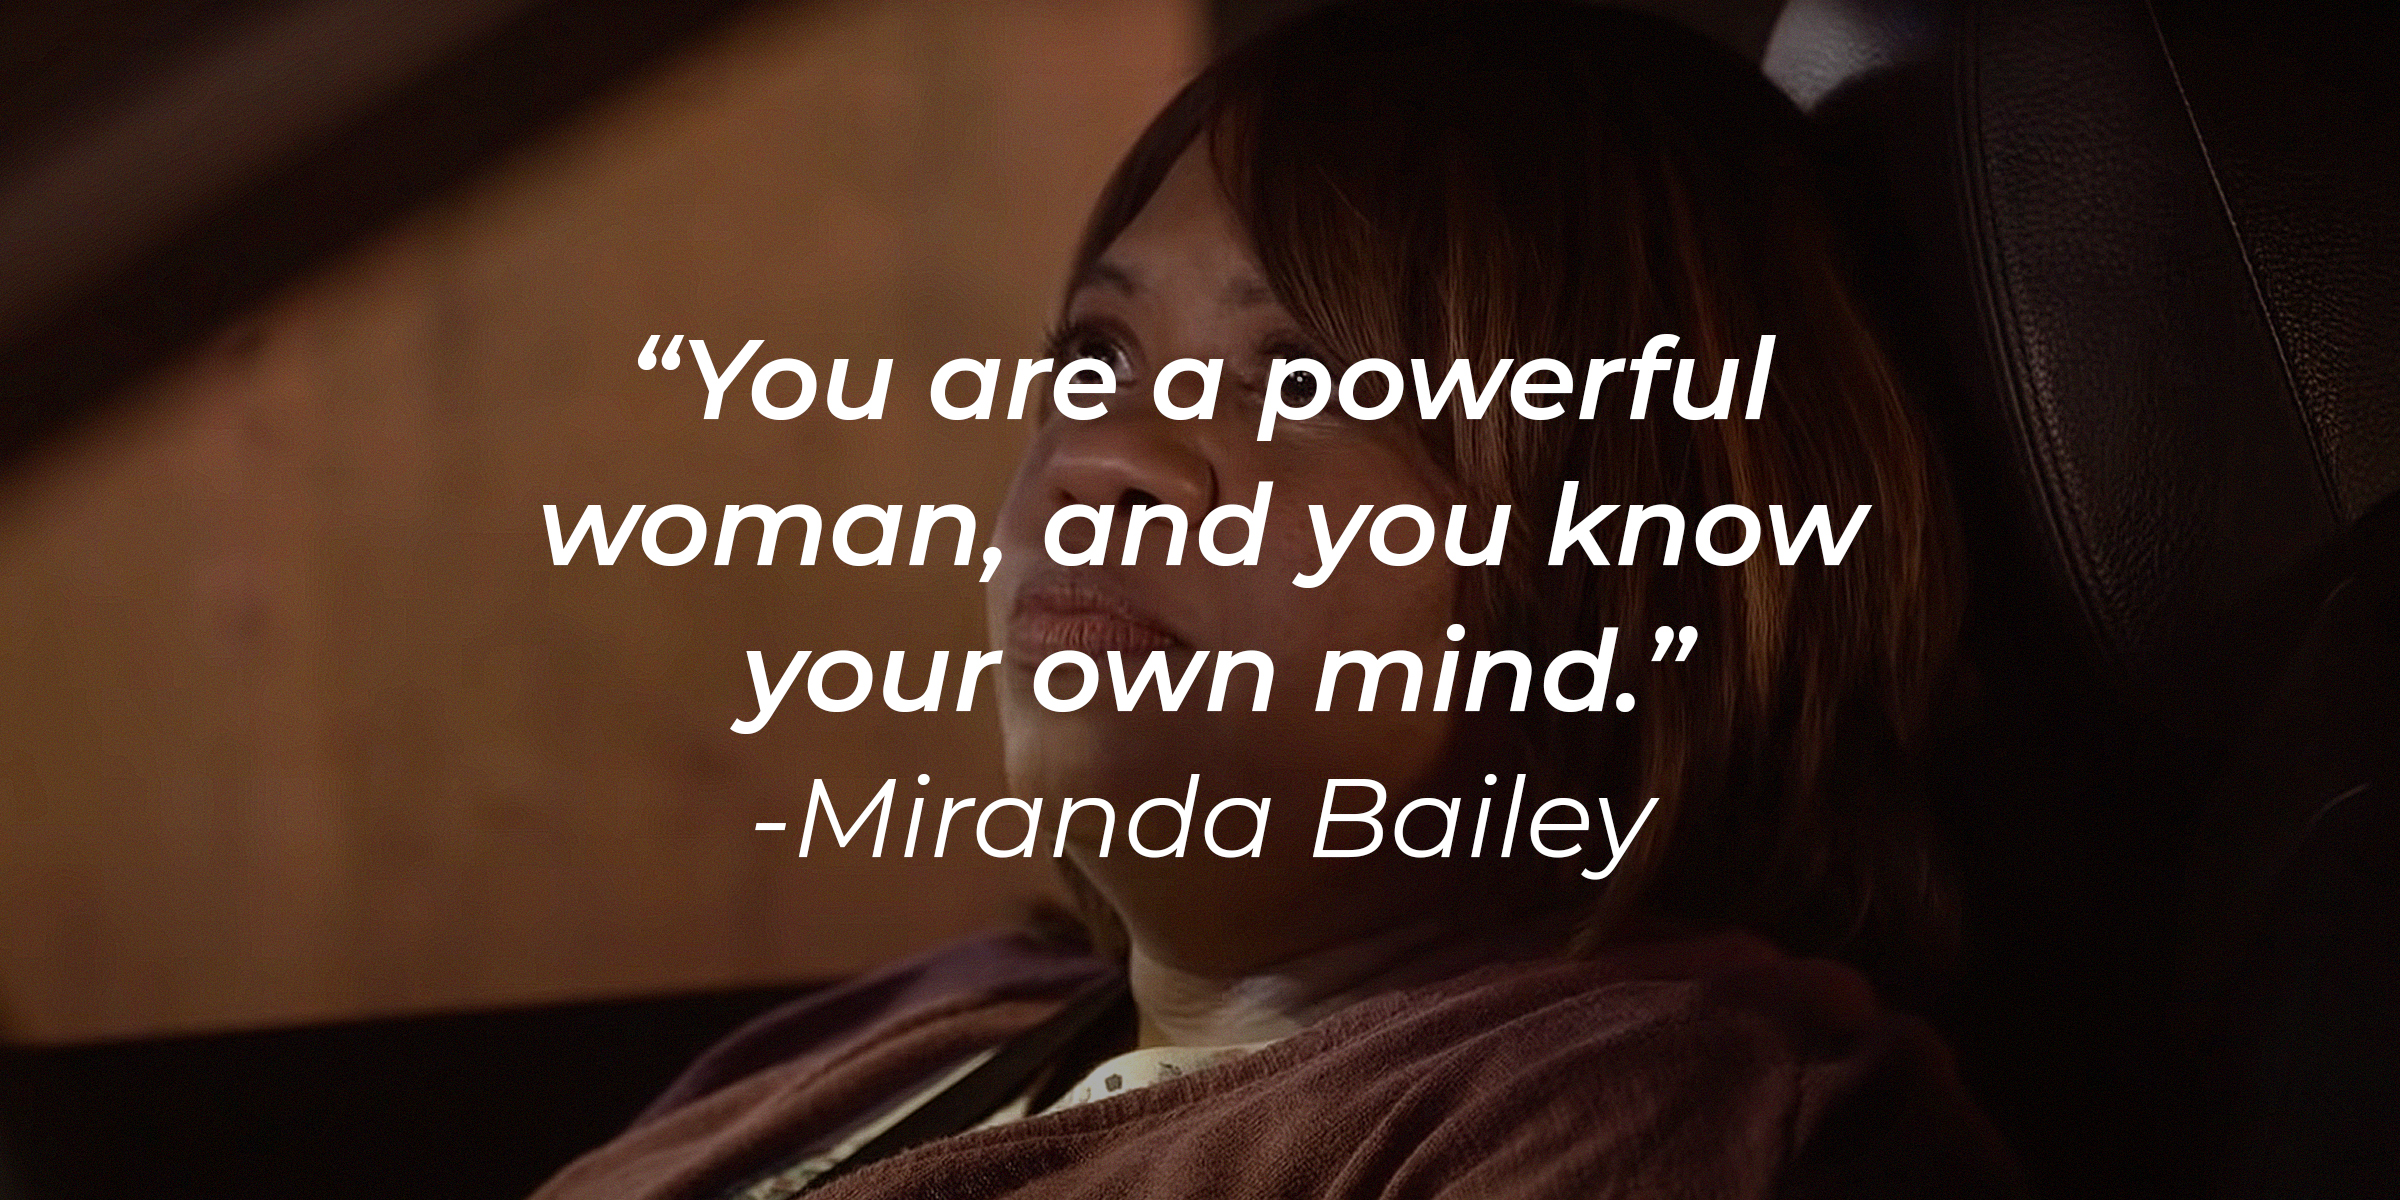 A photo of Miranda Bailey with her quote, "You are a powerful woman, and you know your own mind." | Source: youtube.com/ABCNetwork